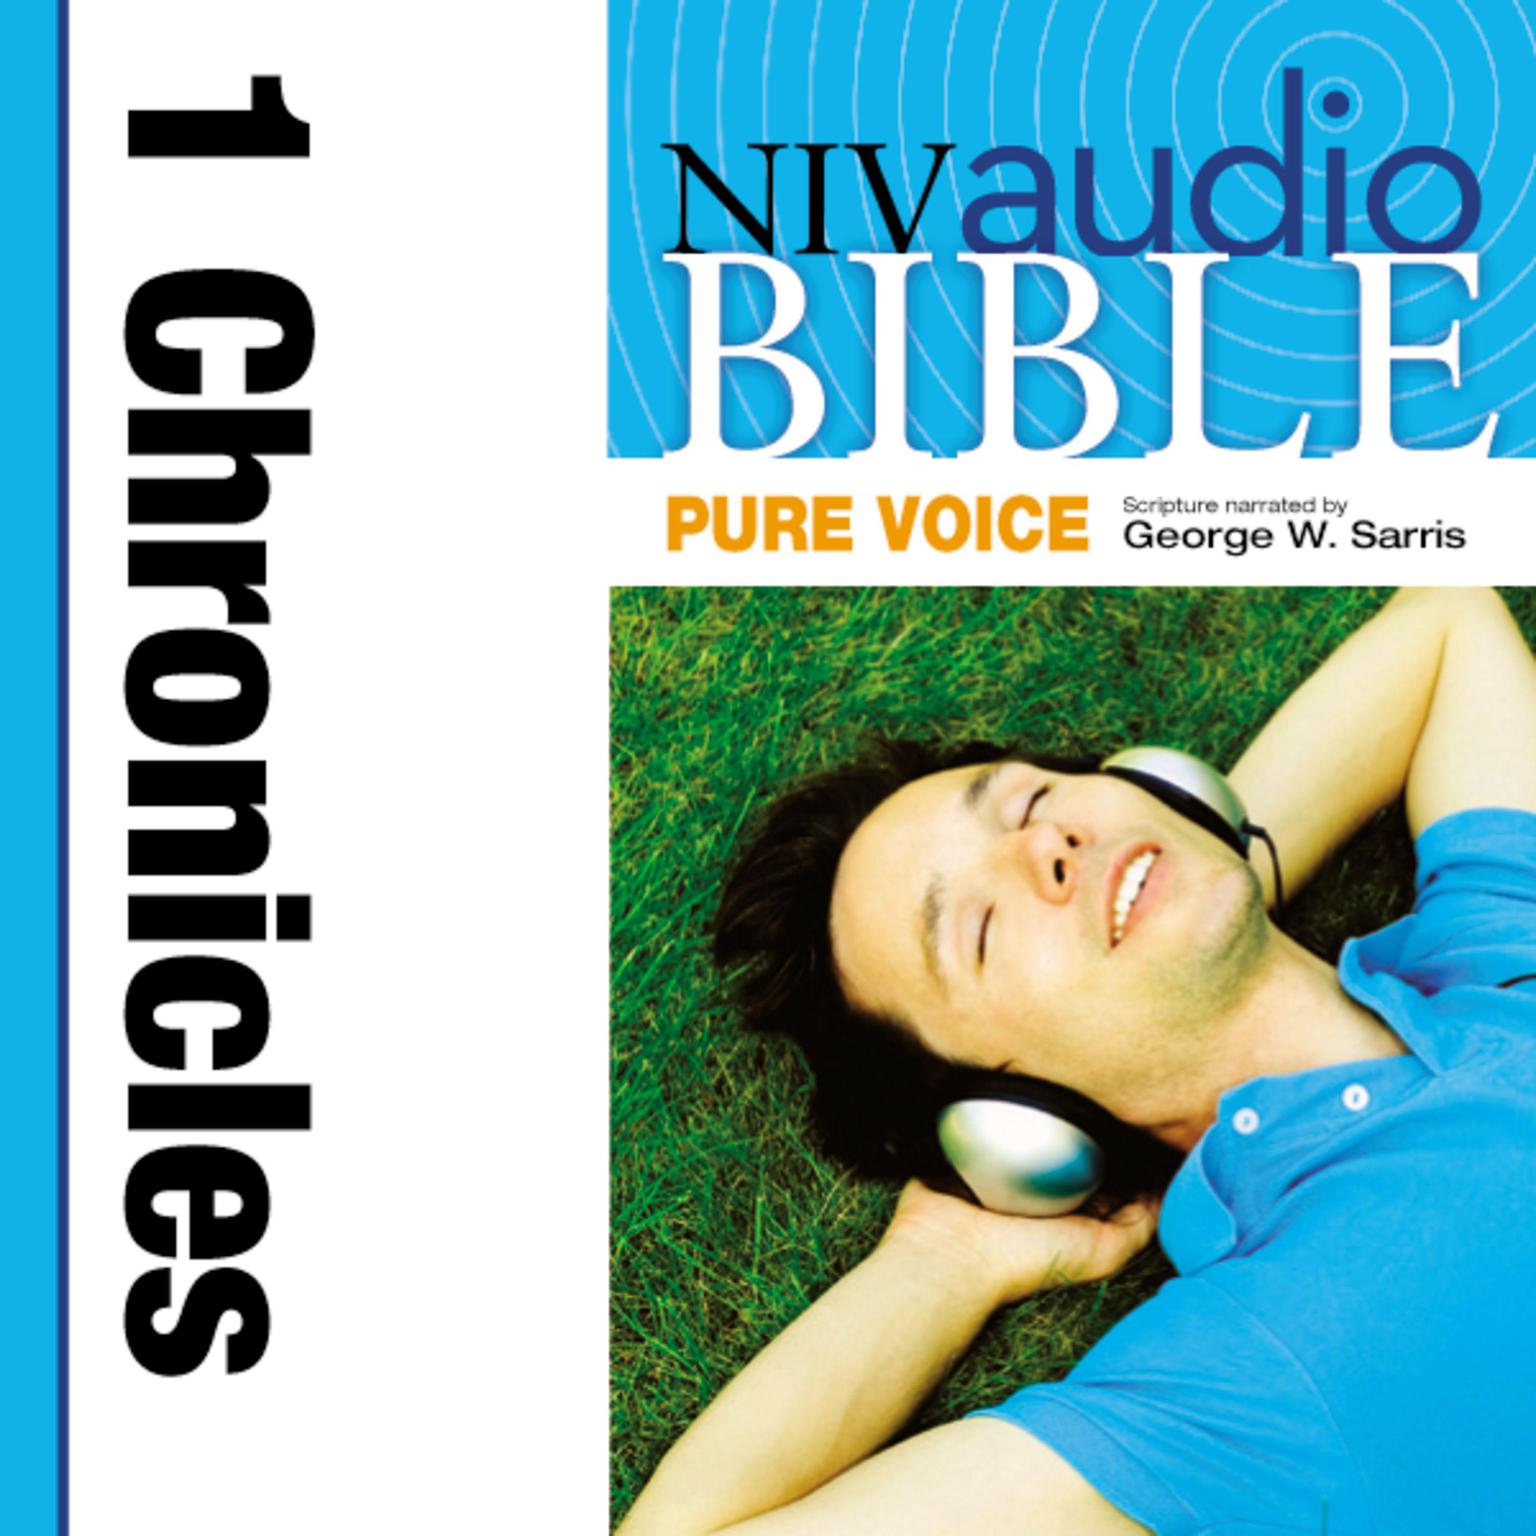 Pure Voice Audio Bible - New International Version, NIV (Narrated by George W. Sarris): (12) 1 Chronicles Audiobook, by Zondervan